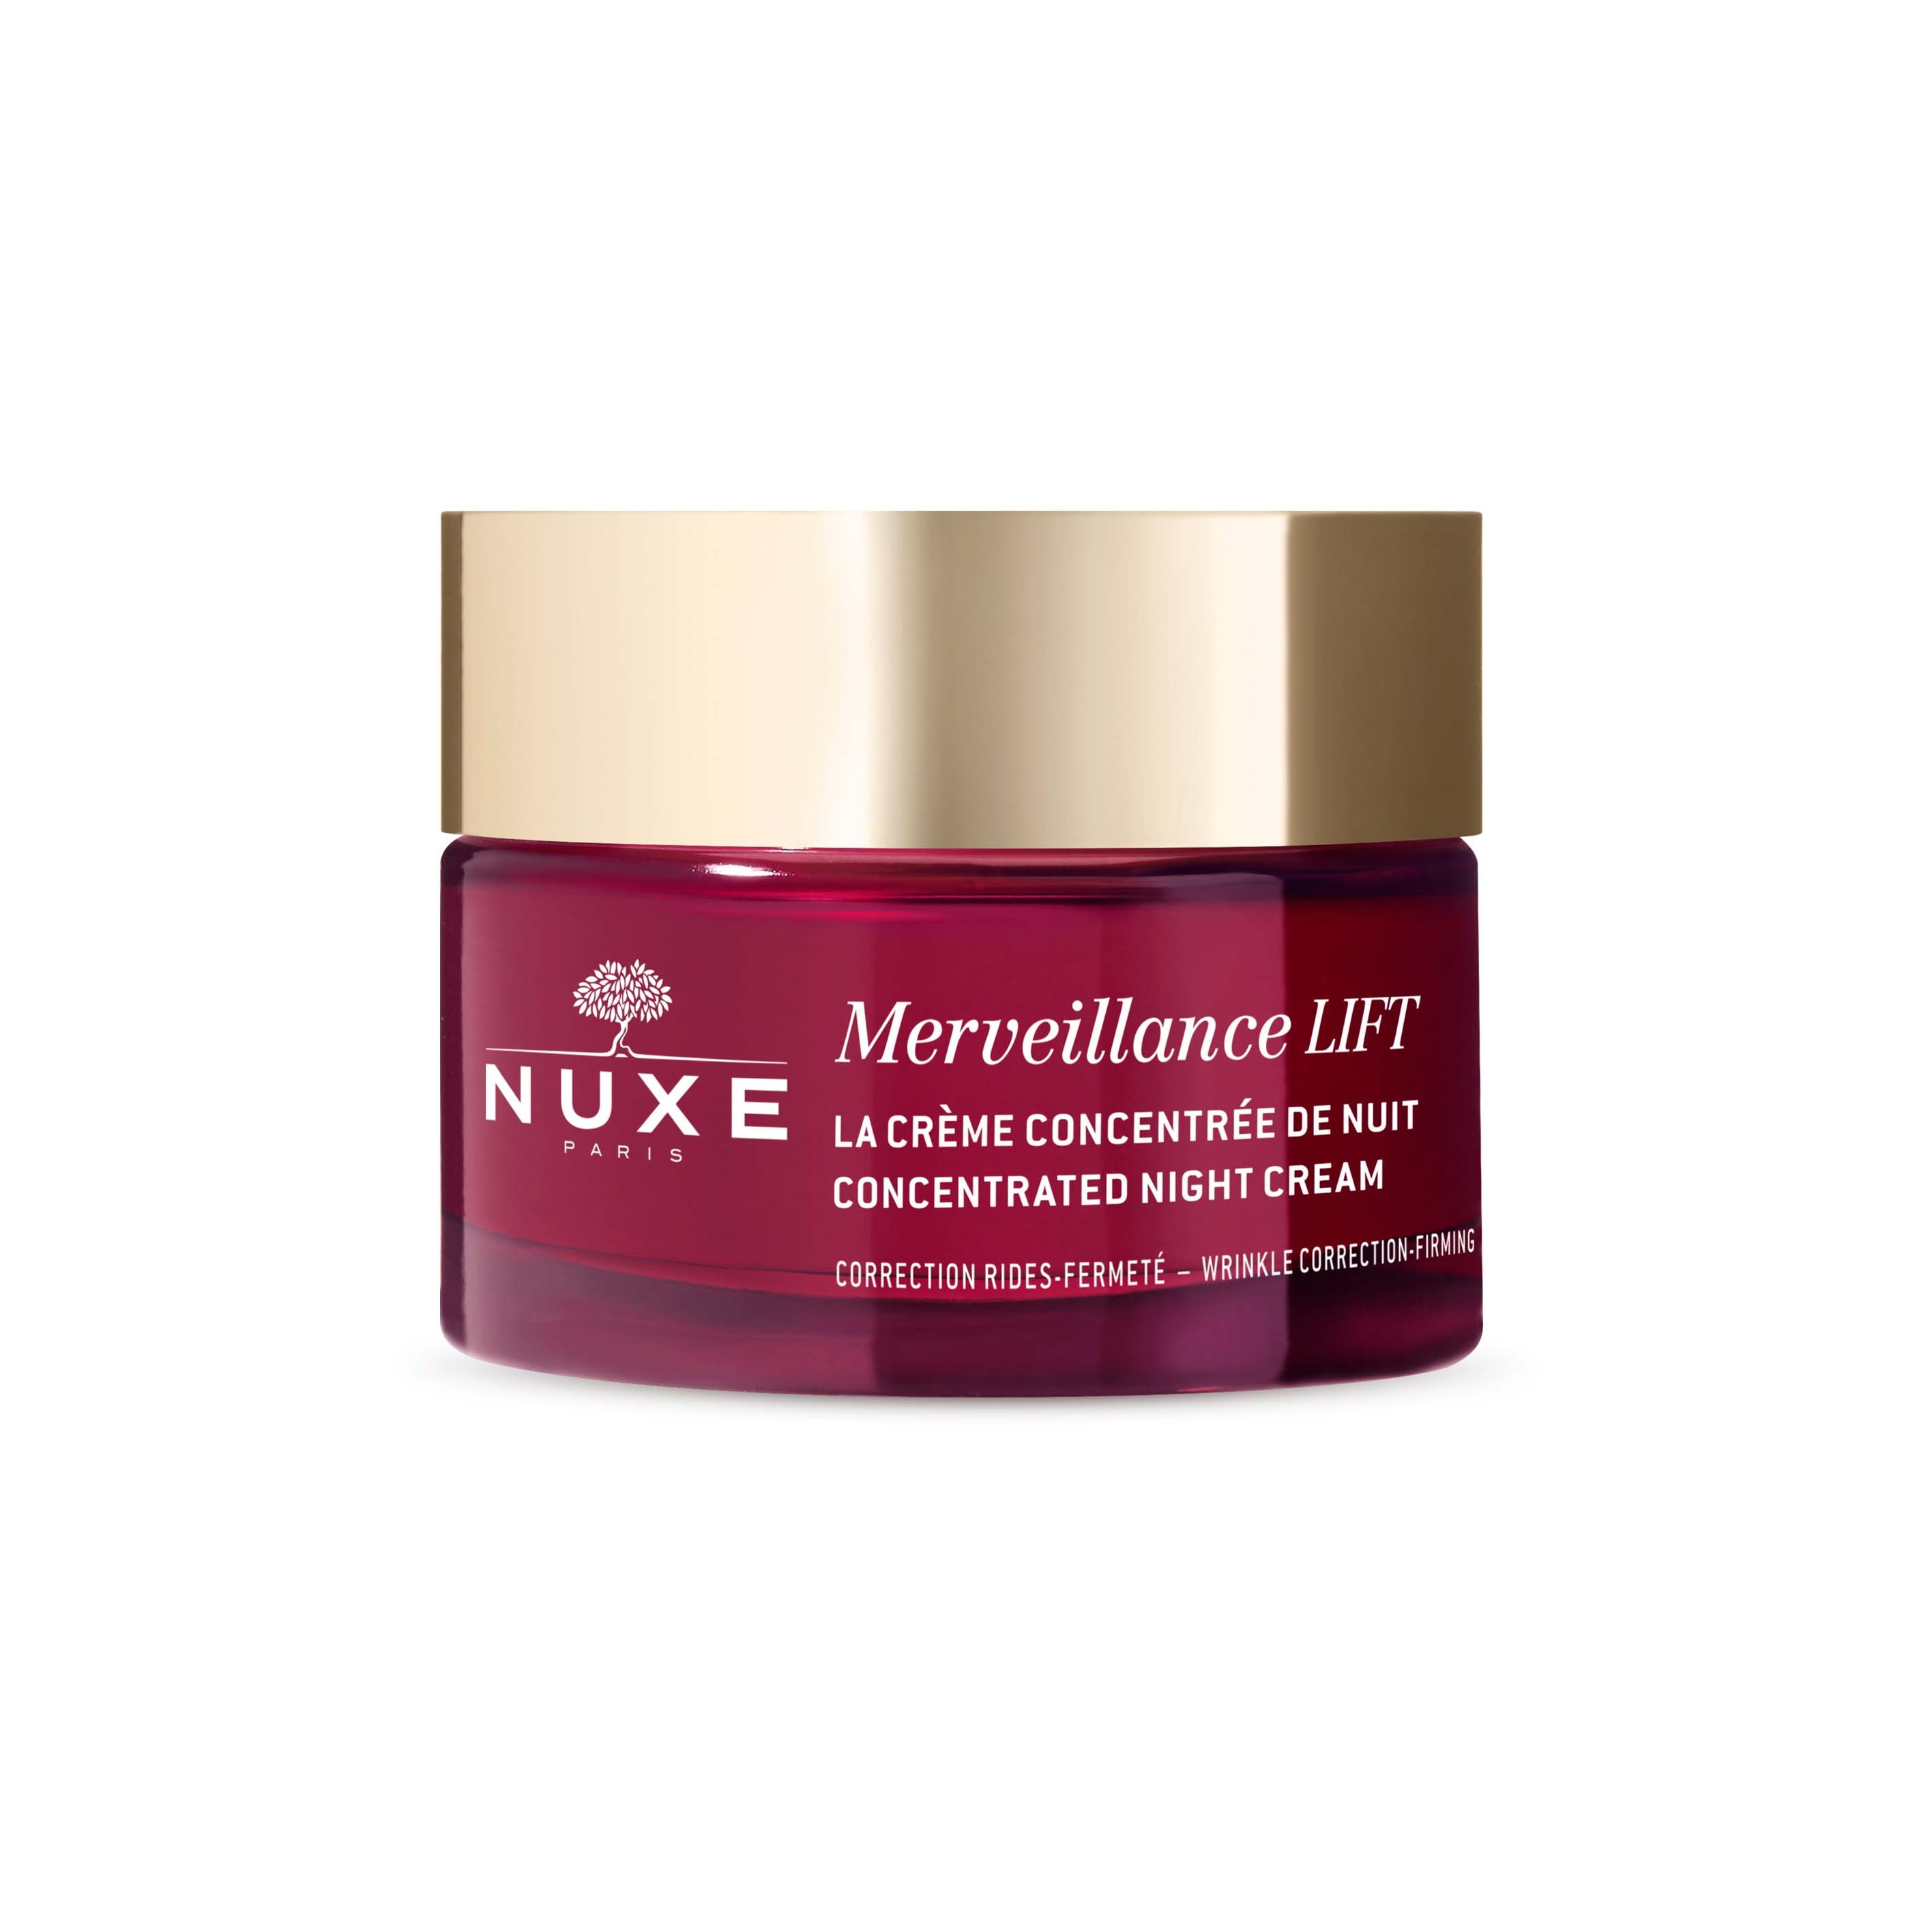 Läs mer om Nuxe Merveillance LIFT Concentrated Night Cream Wrinkle Correction - F